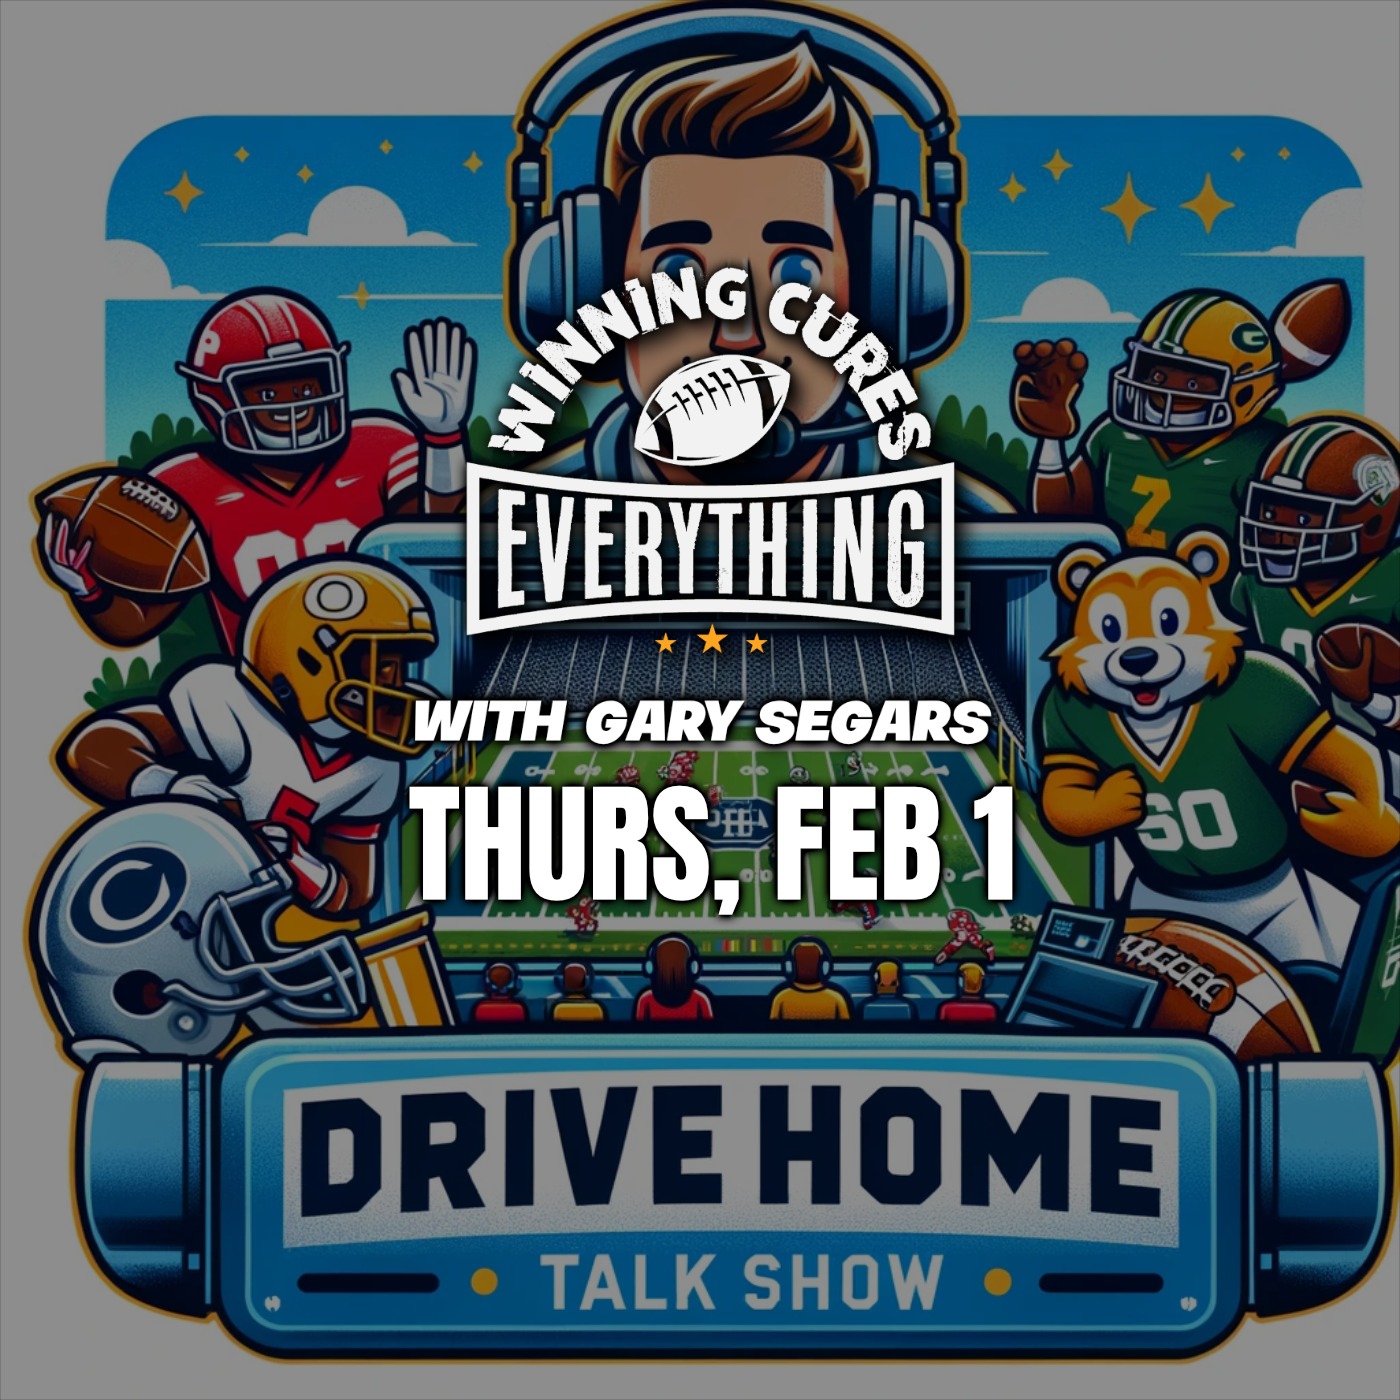 WCE Drive Home Ep1: Hafley to the Packers, Alabama baseball gambling, CFB numbers vs health, etc